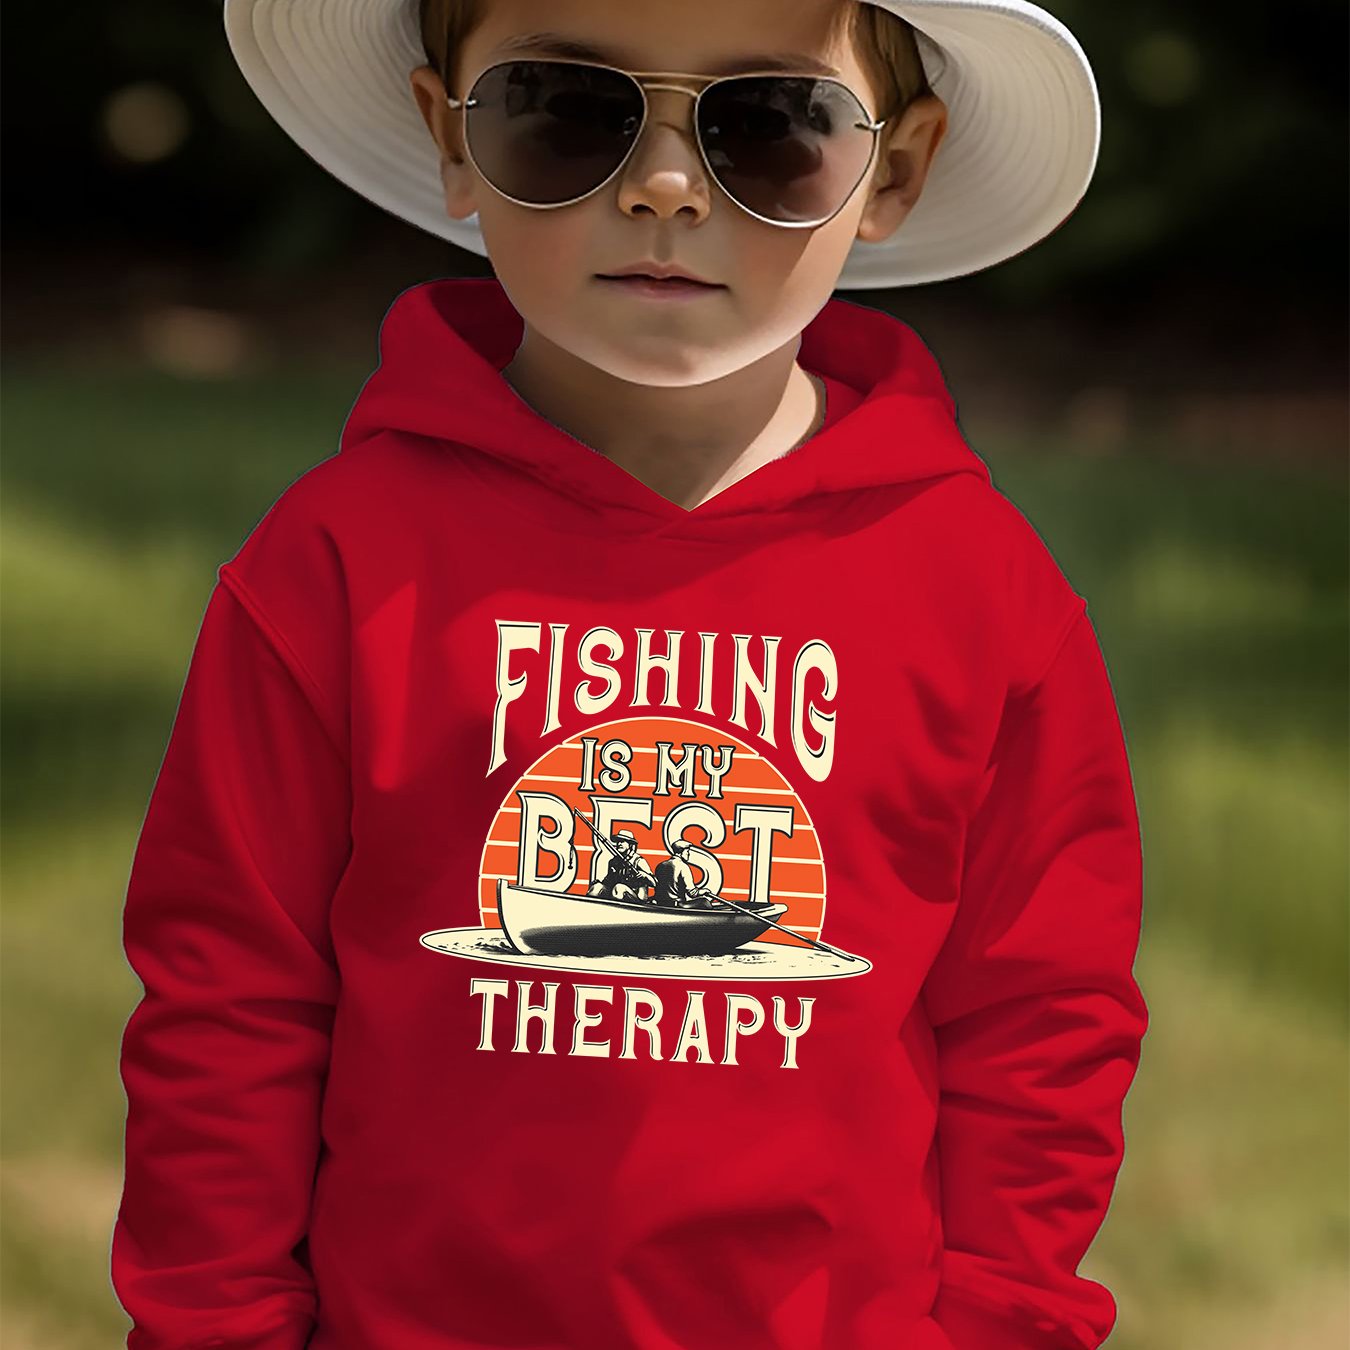 FISHING IS MY * THERAPY Print Kid's Hoodie, Causal Pullover, Hooded Long  Sleeve Top, Boy's Clothes For Spring Fall, As Christmas Gift